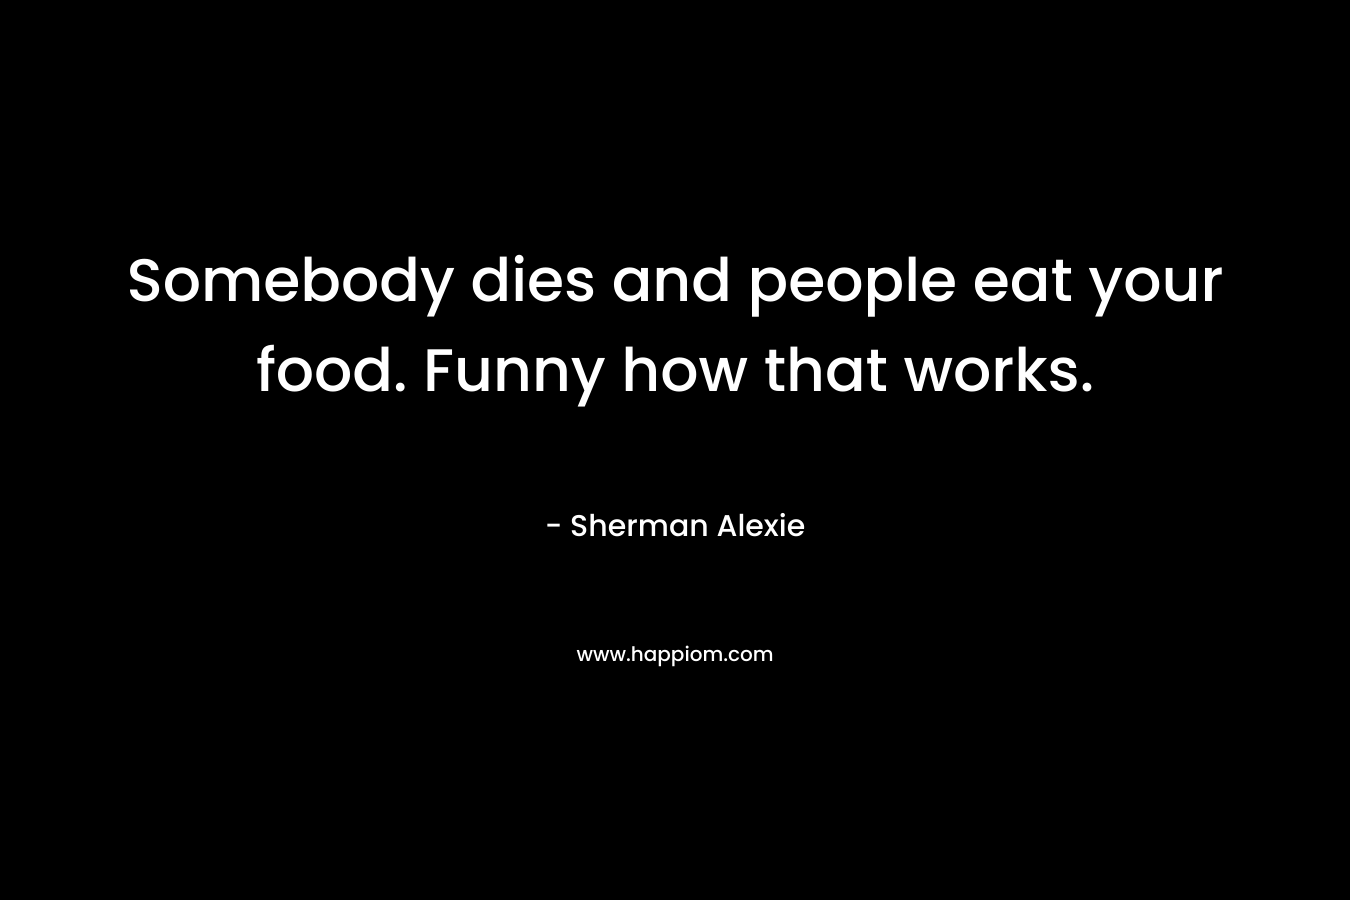 Somebody dies and people eat your food. Funny how that works.